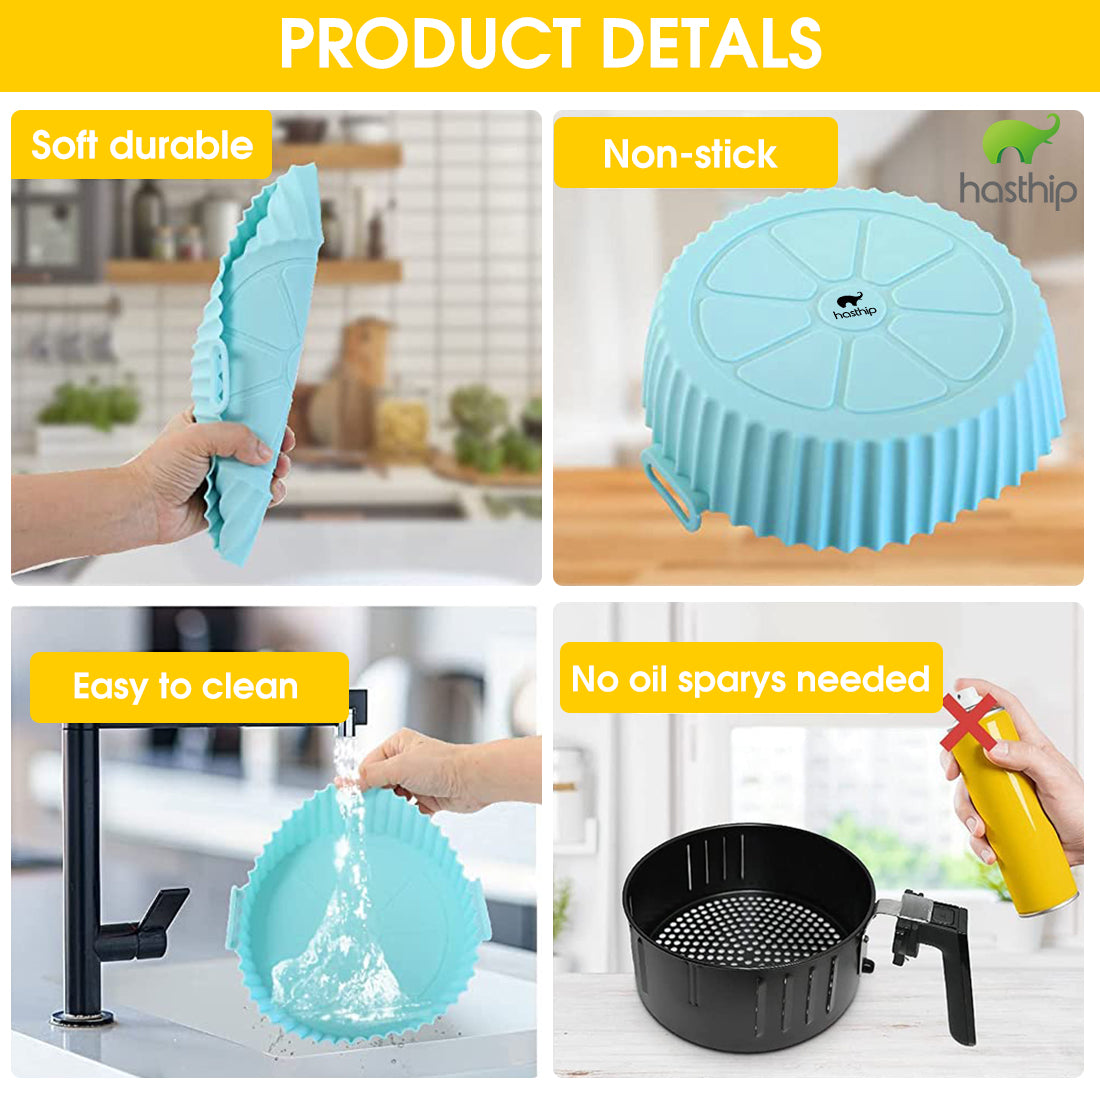 HASTHIP® Air Fryer Reusable Silicone Pot, 6.8 inch Non-Stick Silicone Air Fryer Liners with Ear Handles, Air Fryer Accessories, Round Air Fryer Oven Pot Foodgrade Silicone Heat Resistant (Blue)